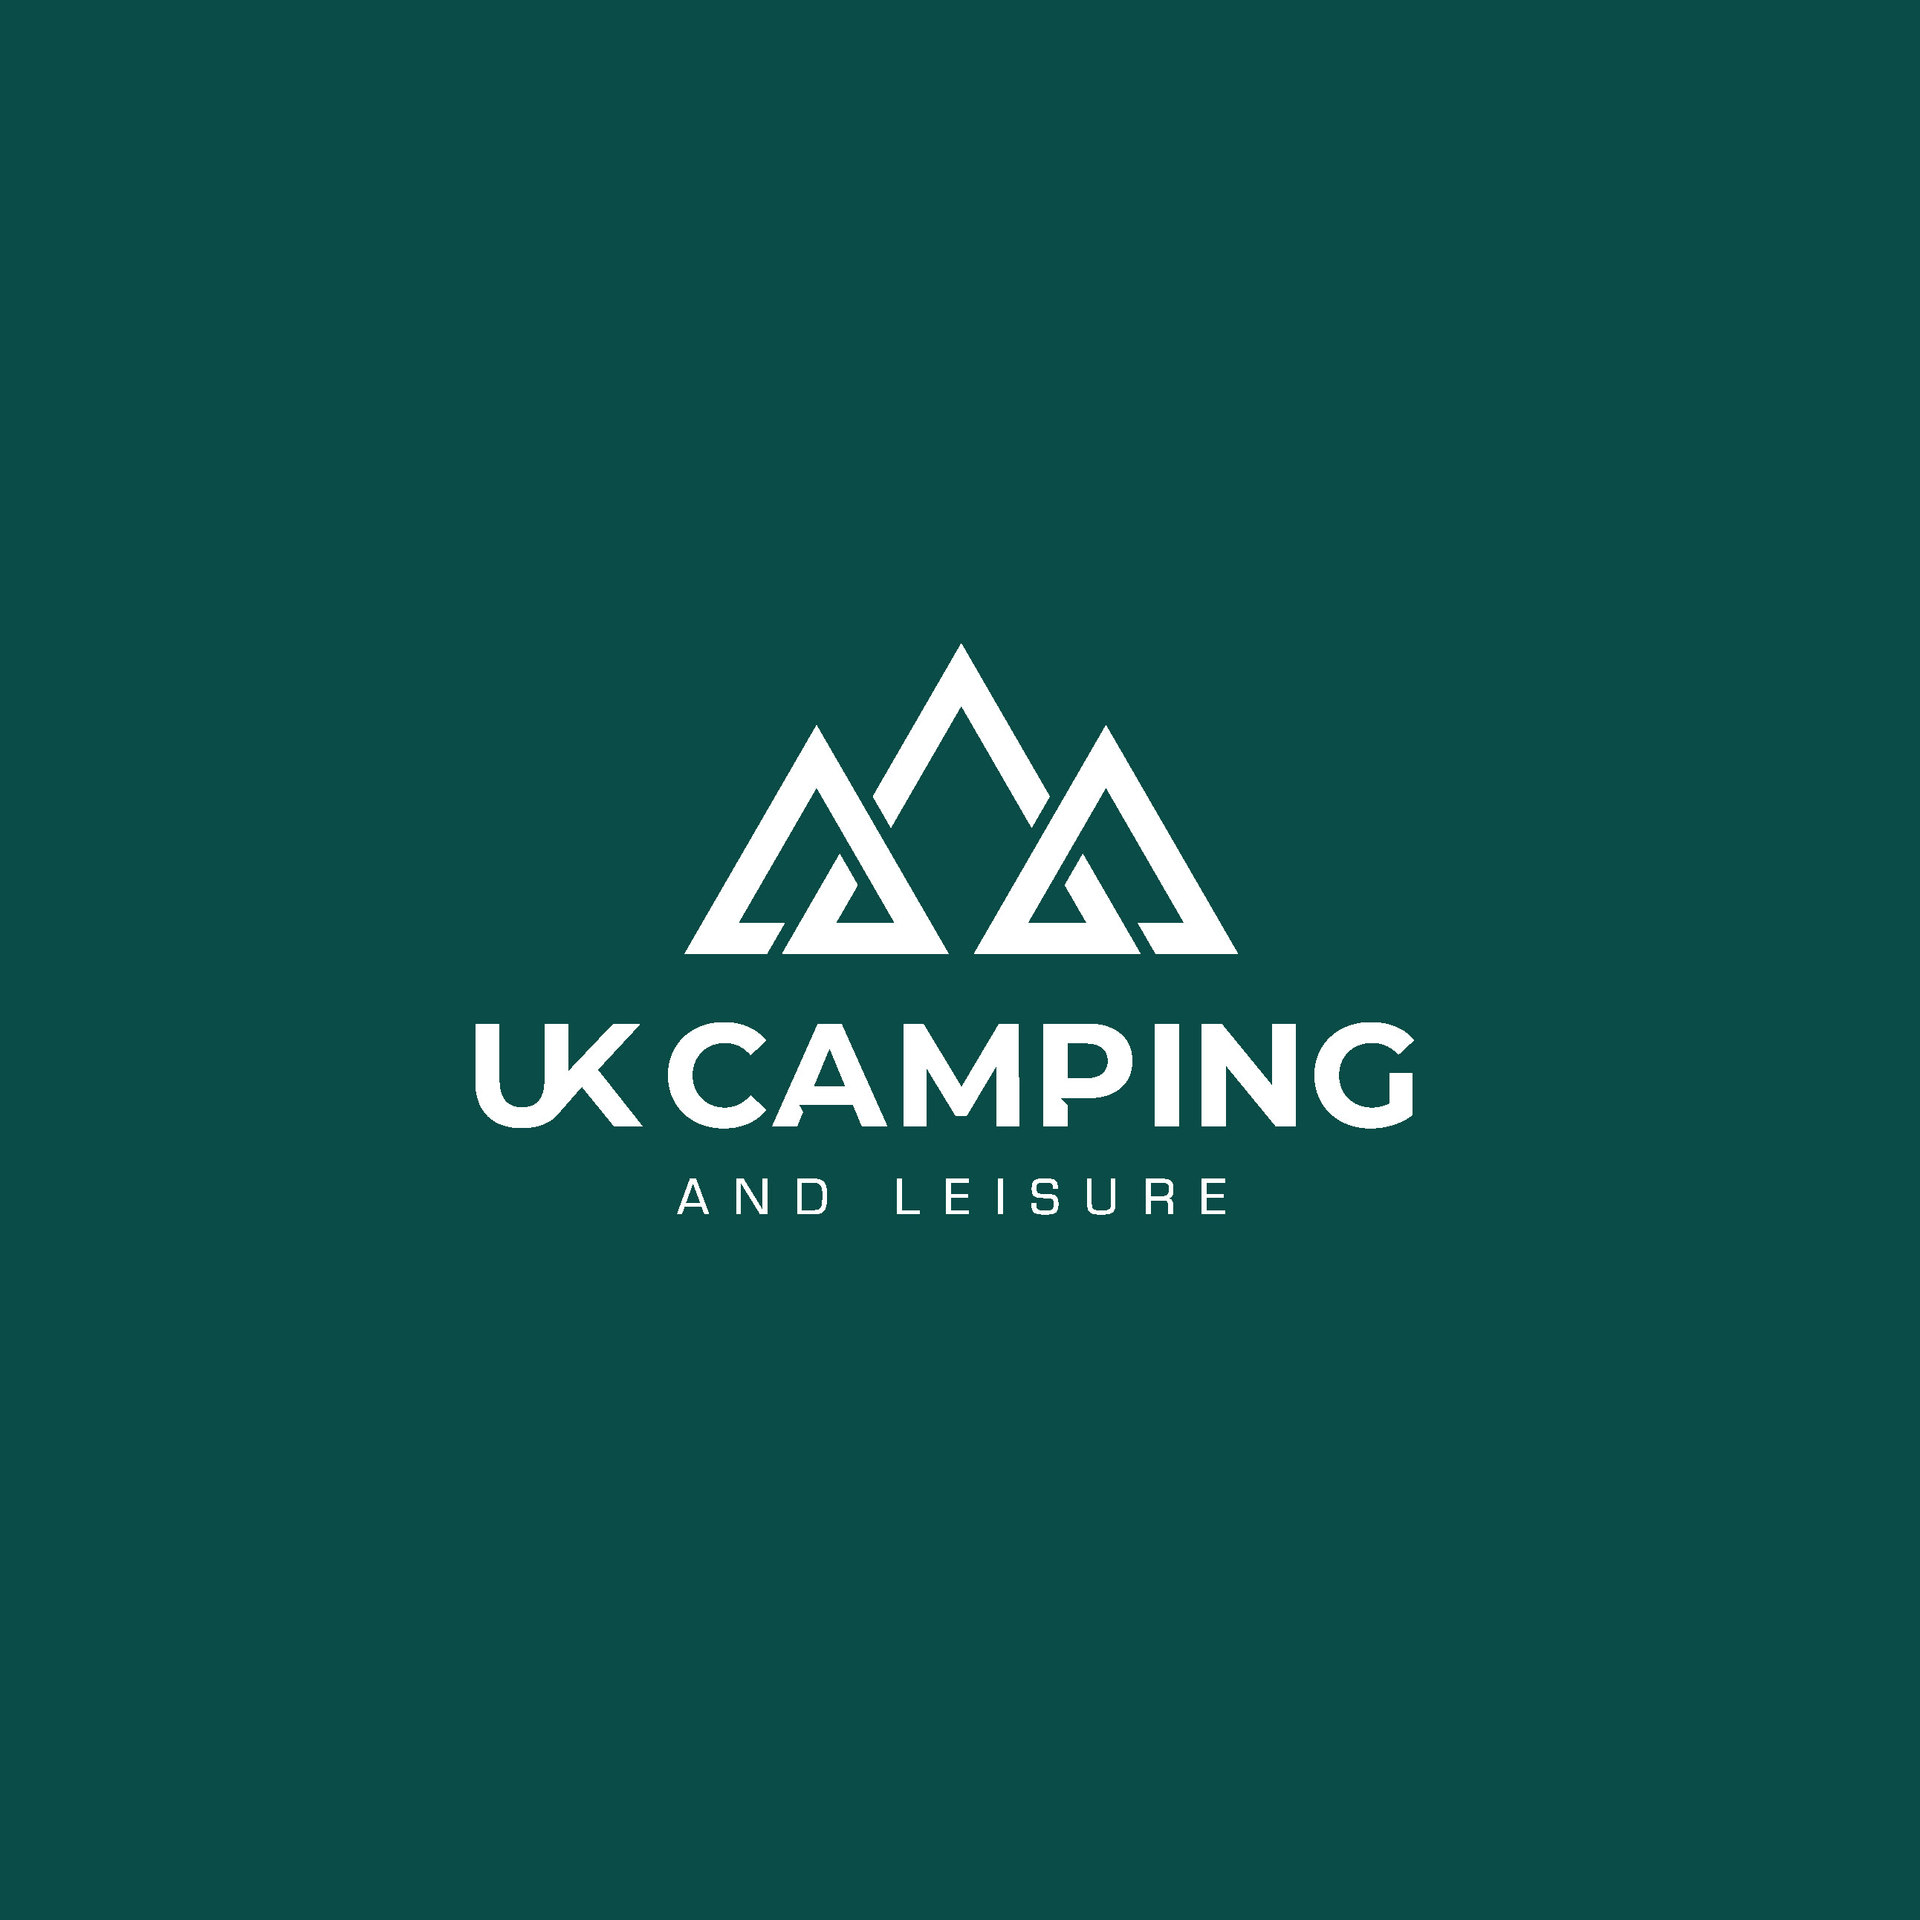 UK Camping and Leisure